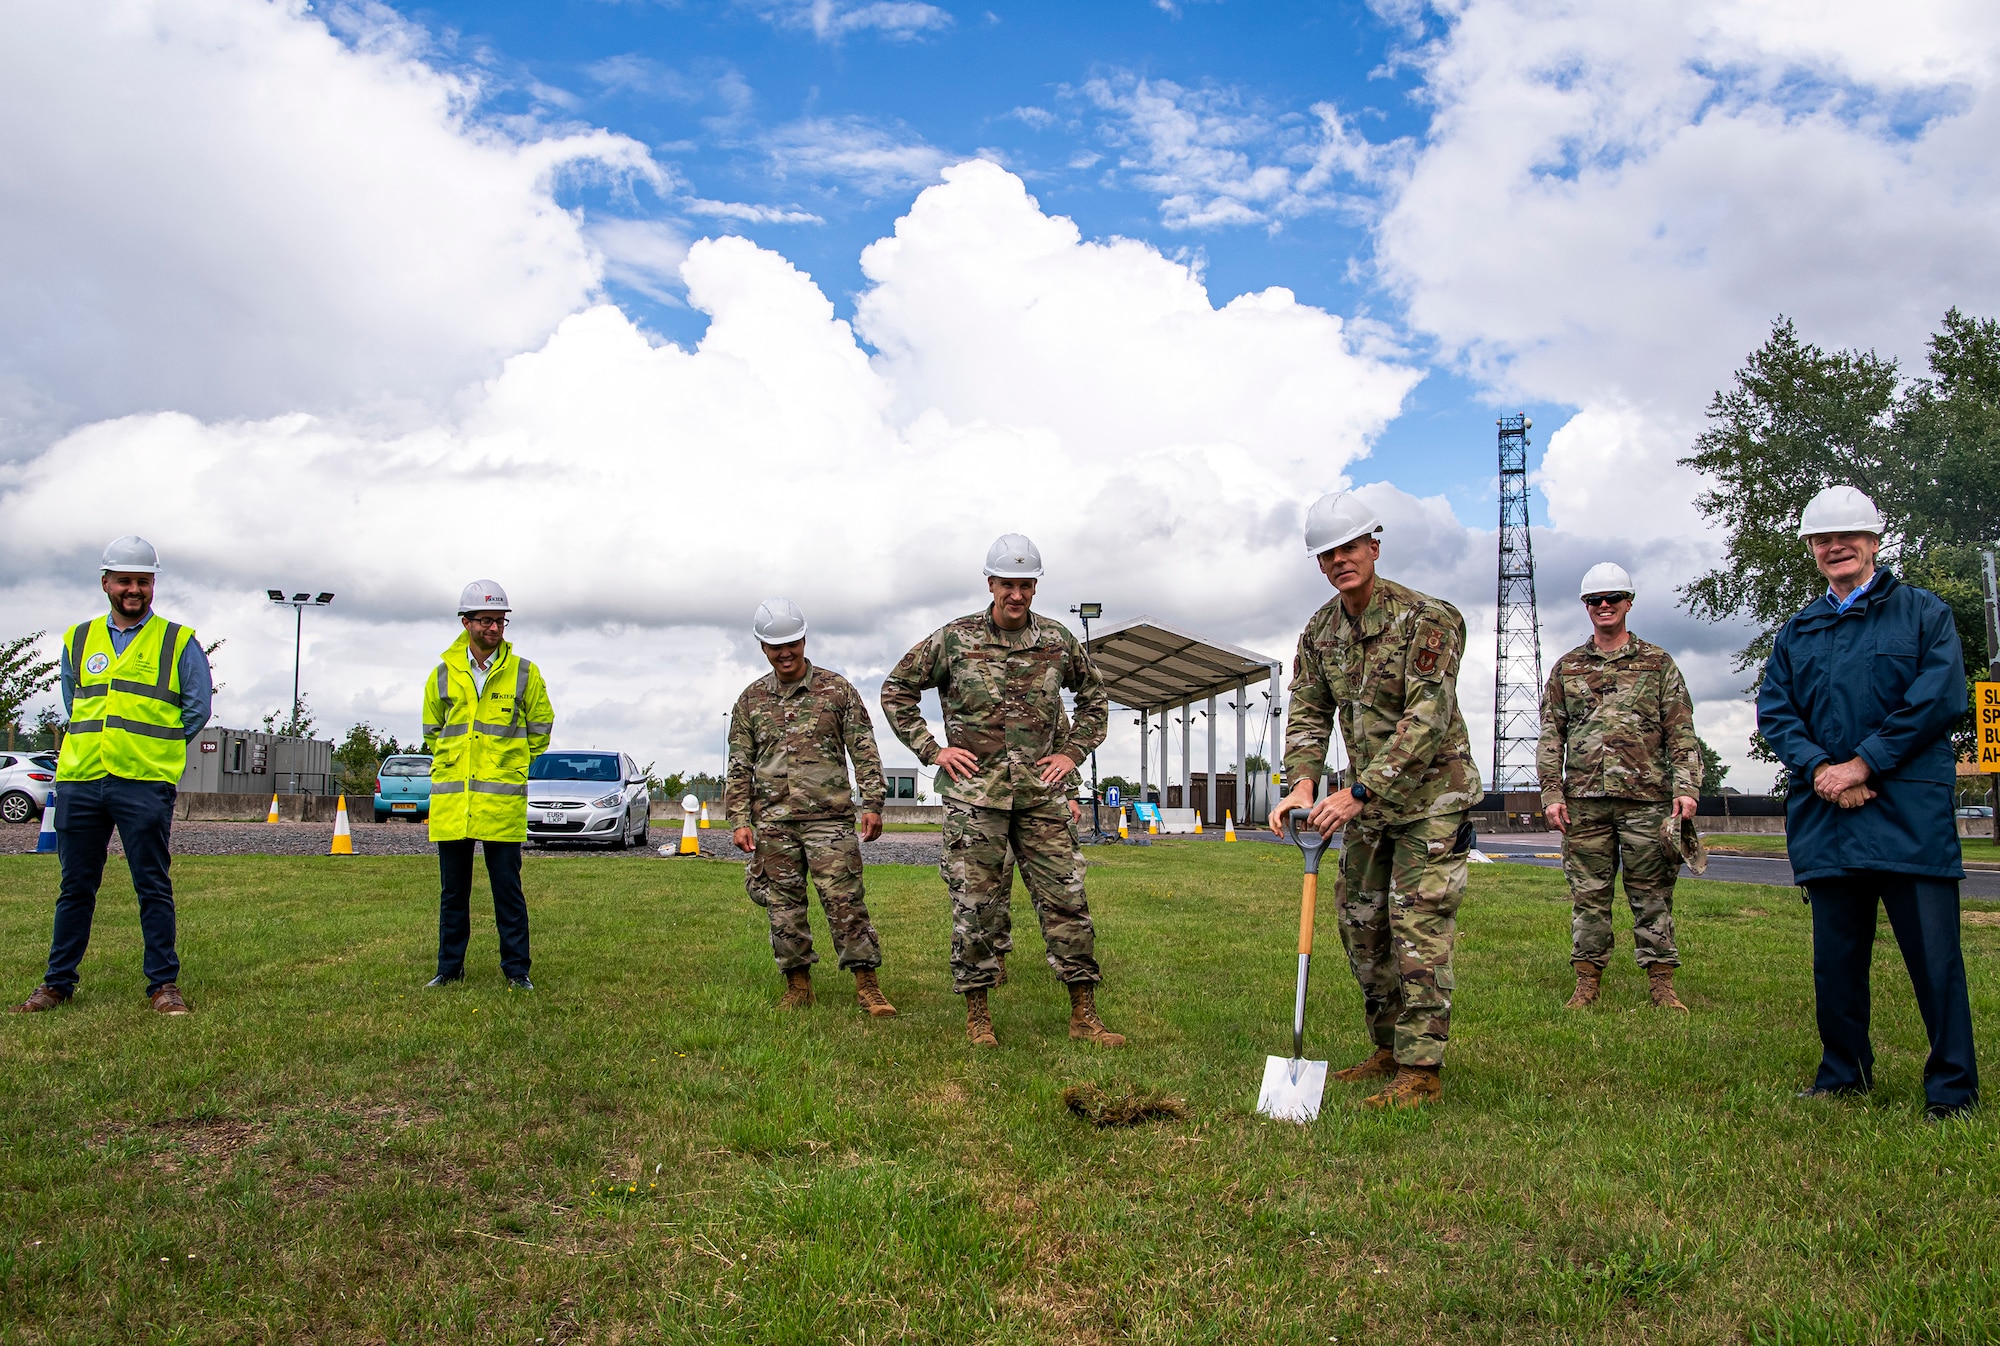 U.S. Air Force Chief Master Sgt. Michael Groder (center right), 423d Security Forces Squadron manager, breaks ground on a construction project for the main gate at RAF Alconbury, England, July 2020. This project will provide a large vehicle inspection station, channelized traffic flow for better security and improved safety for personnel. Construction will commence on July 6, 2020 and effective from that date, installation entry and exit procedures will be modified to support the construction project. (U.S. Air Force by Senior Airman Eugene Oliver)